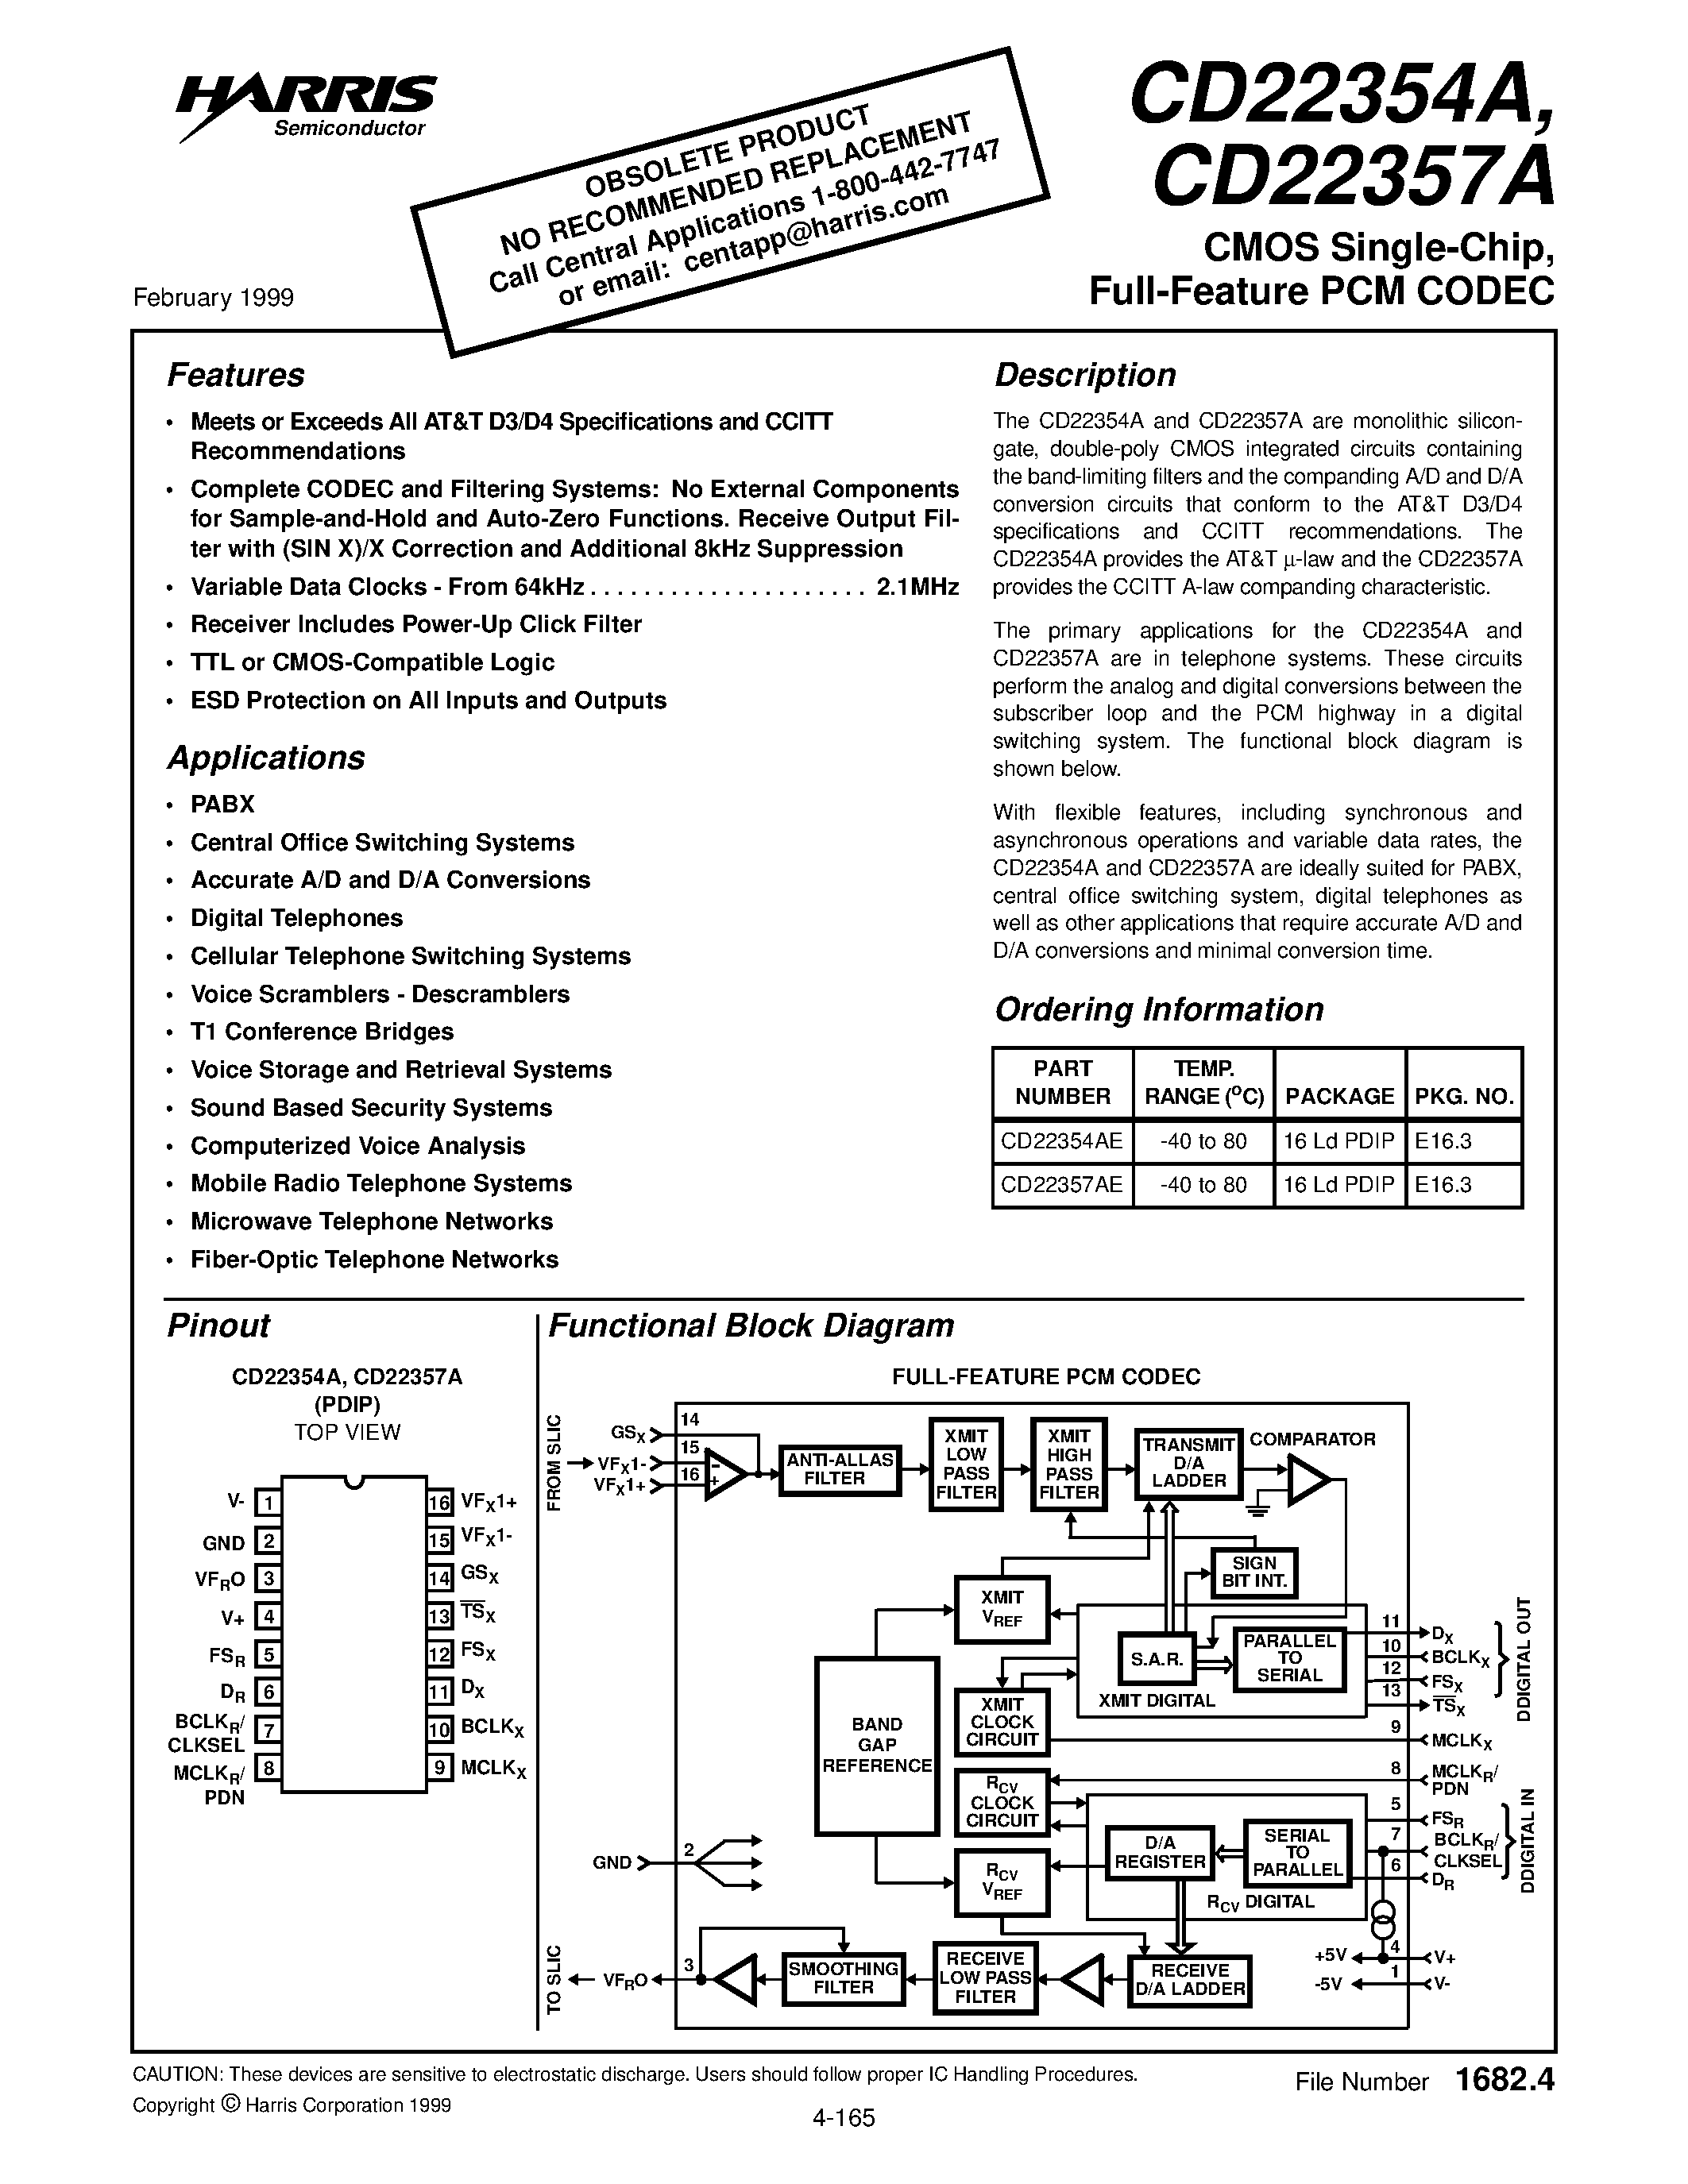 Datasheet CD22354A - CMOS Single-Chip/ Full-Feature PCM CODEC page 1